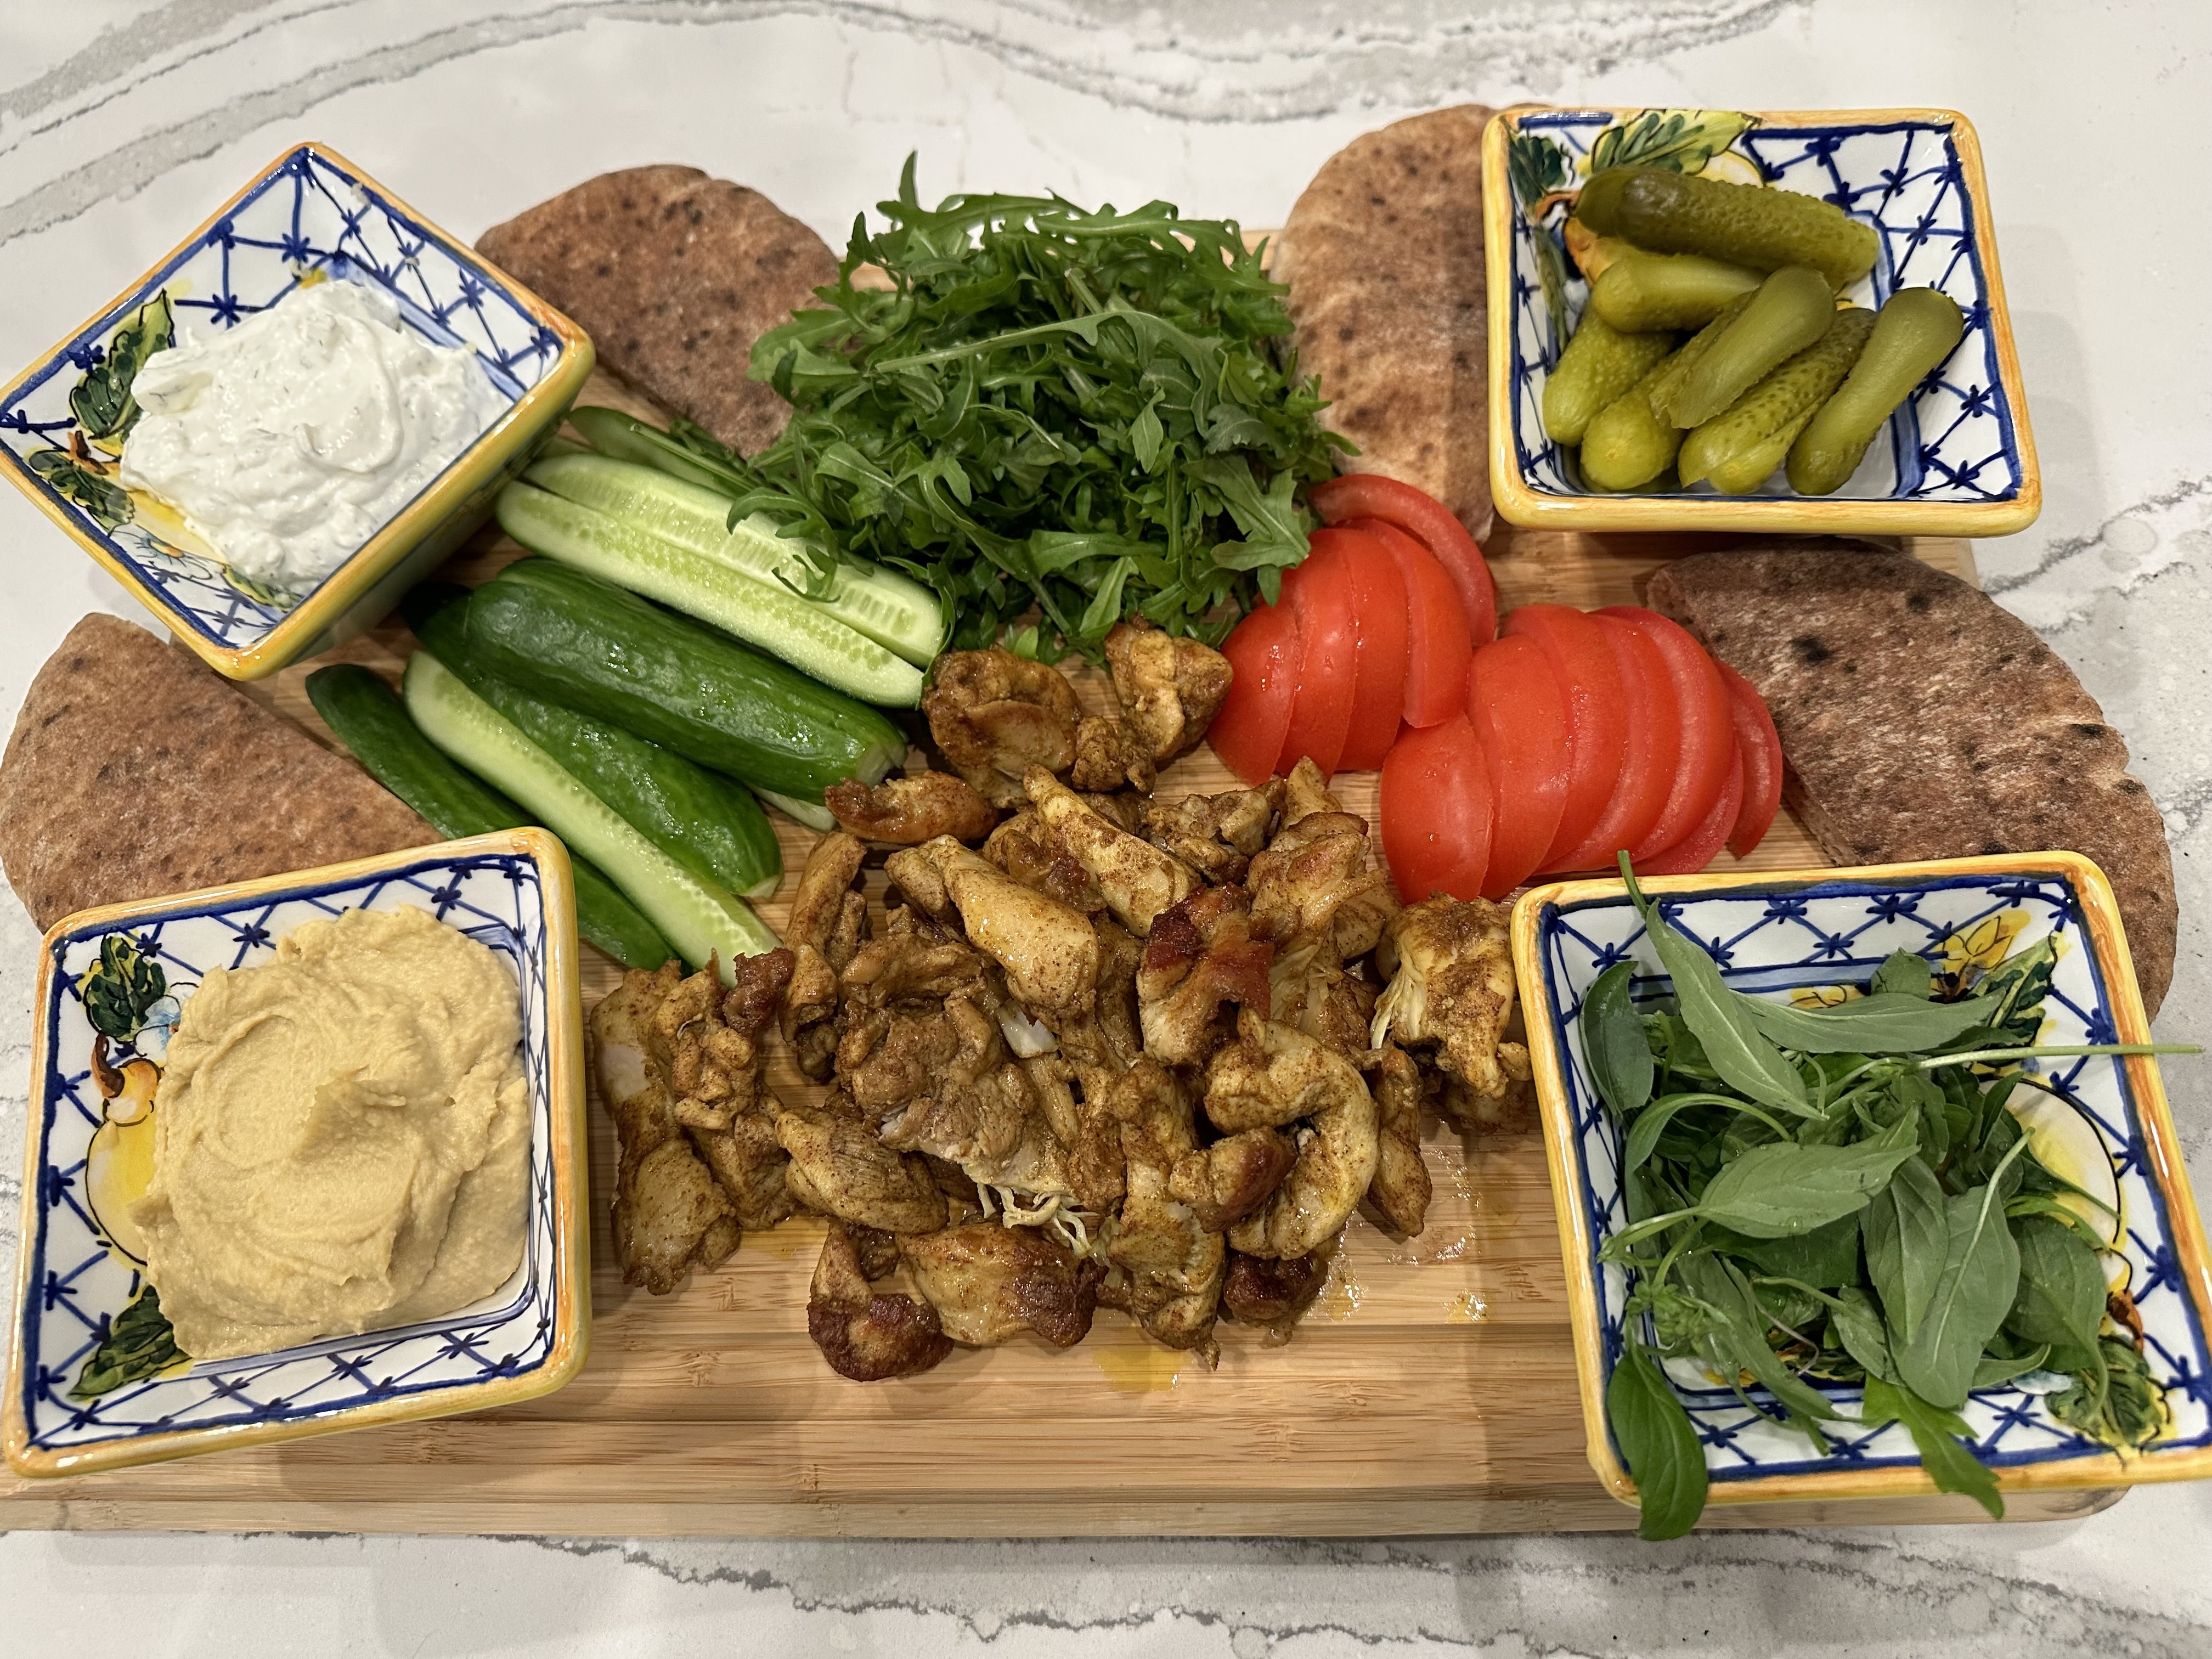 Customize Chicken Shawarma Pita Board with your favorite toppings!